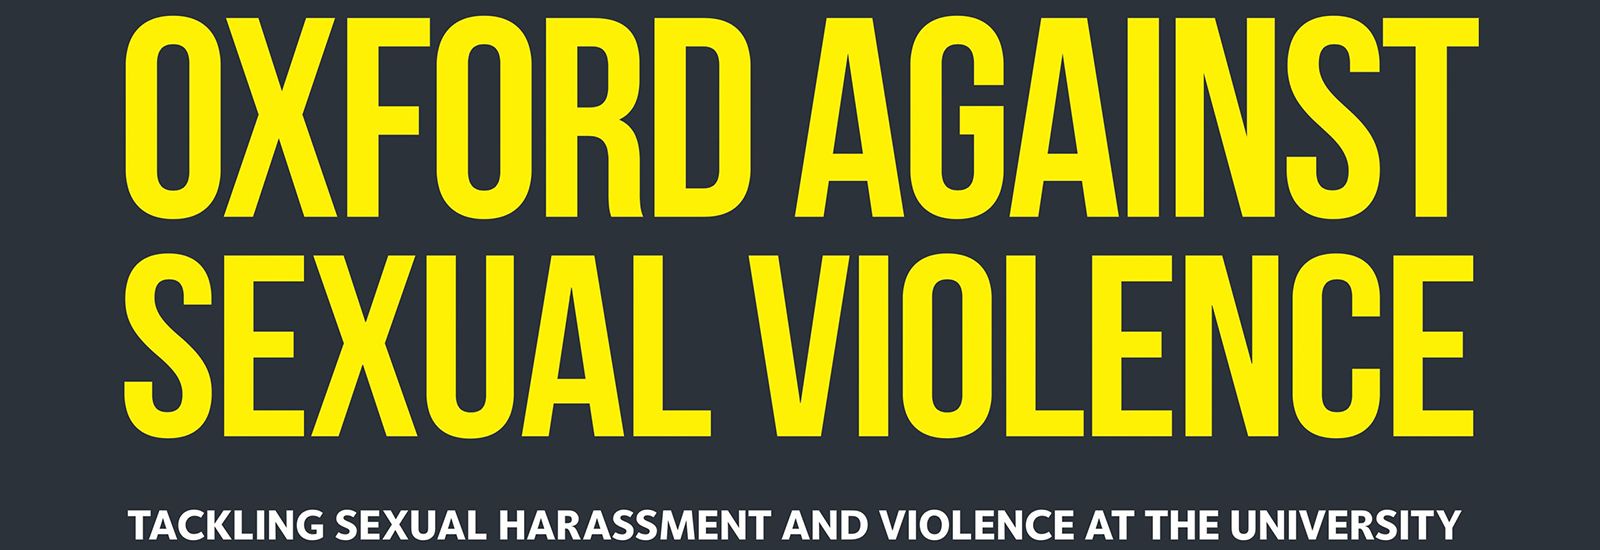 Oxford against sexual violence